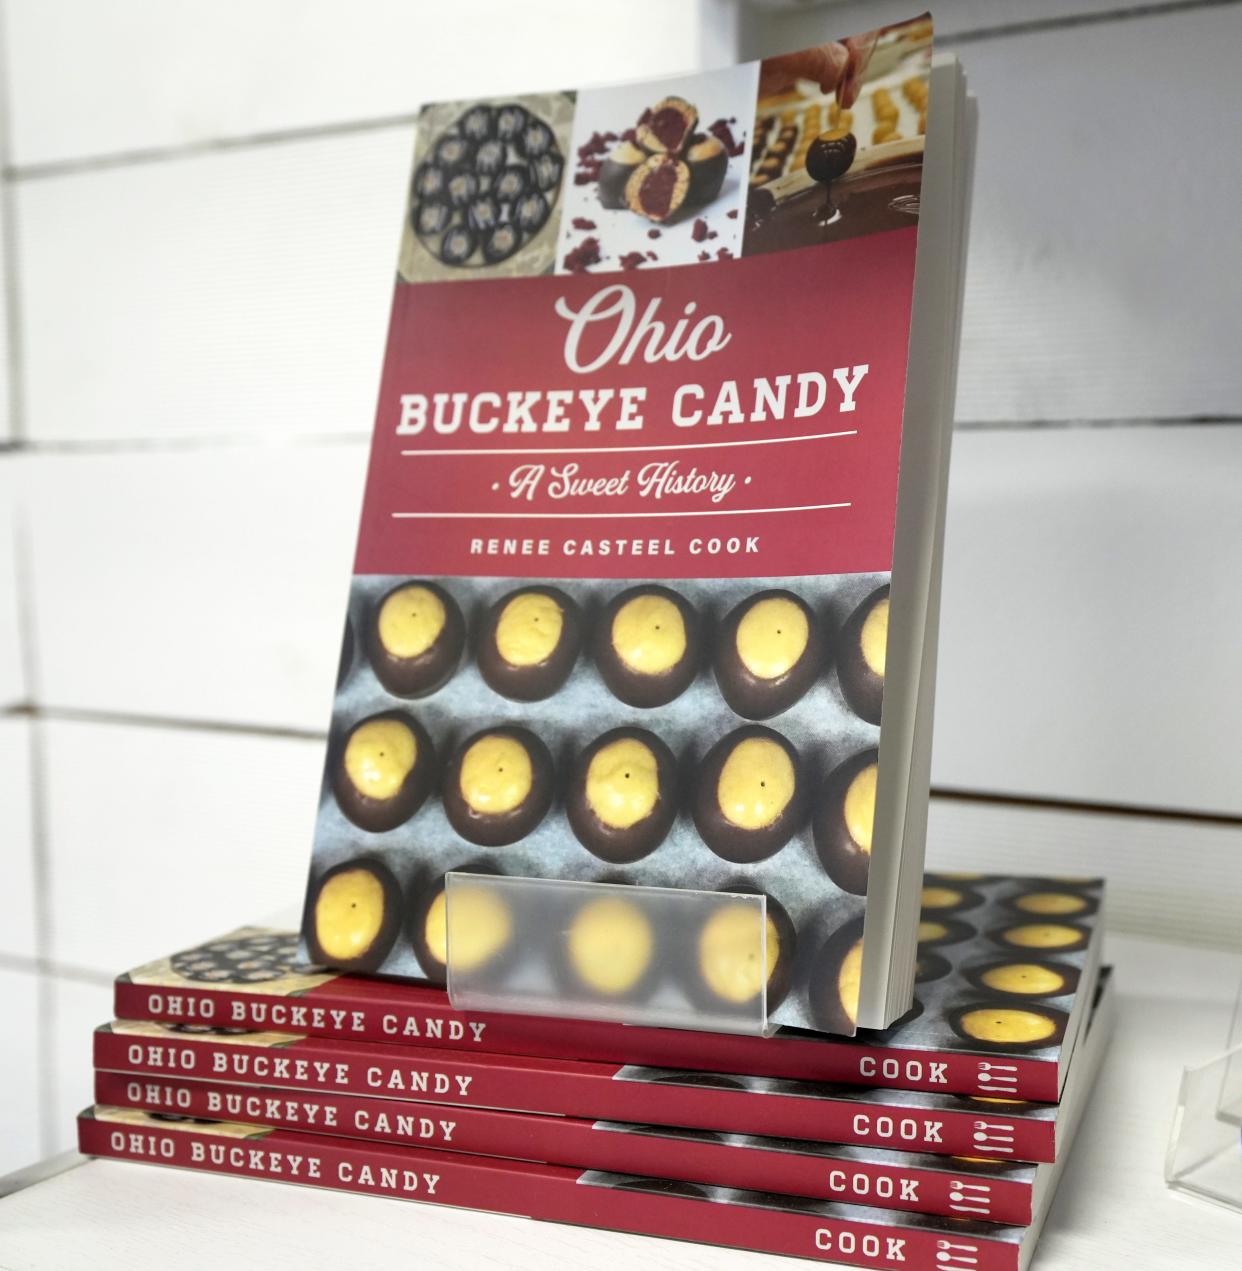 Renee Casteel Cook's book, "Ohio Buckeye Candy: A Sweet History" is on display at The Buckeye Lady store in Clintonville.